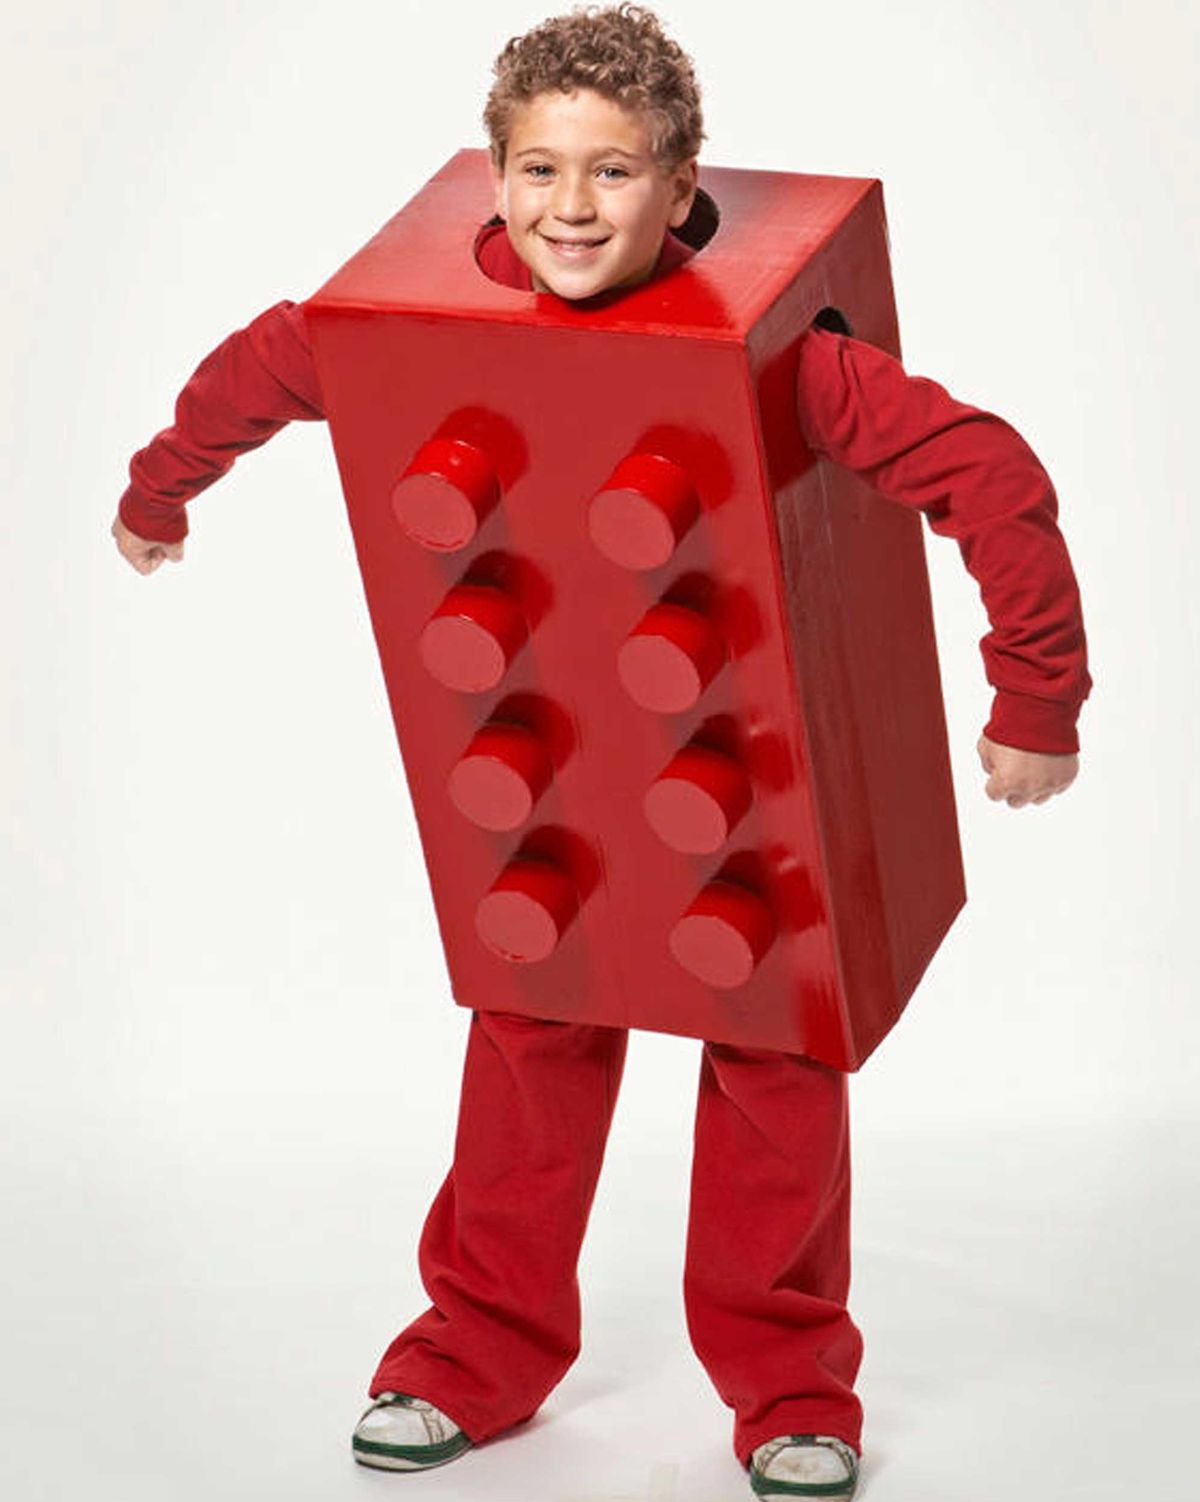 boy wearing red pants, red long sleeved shirt, and giant homemade red lego box costume